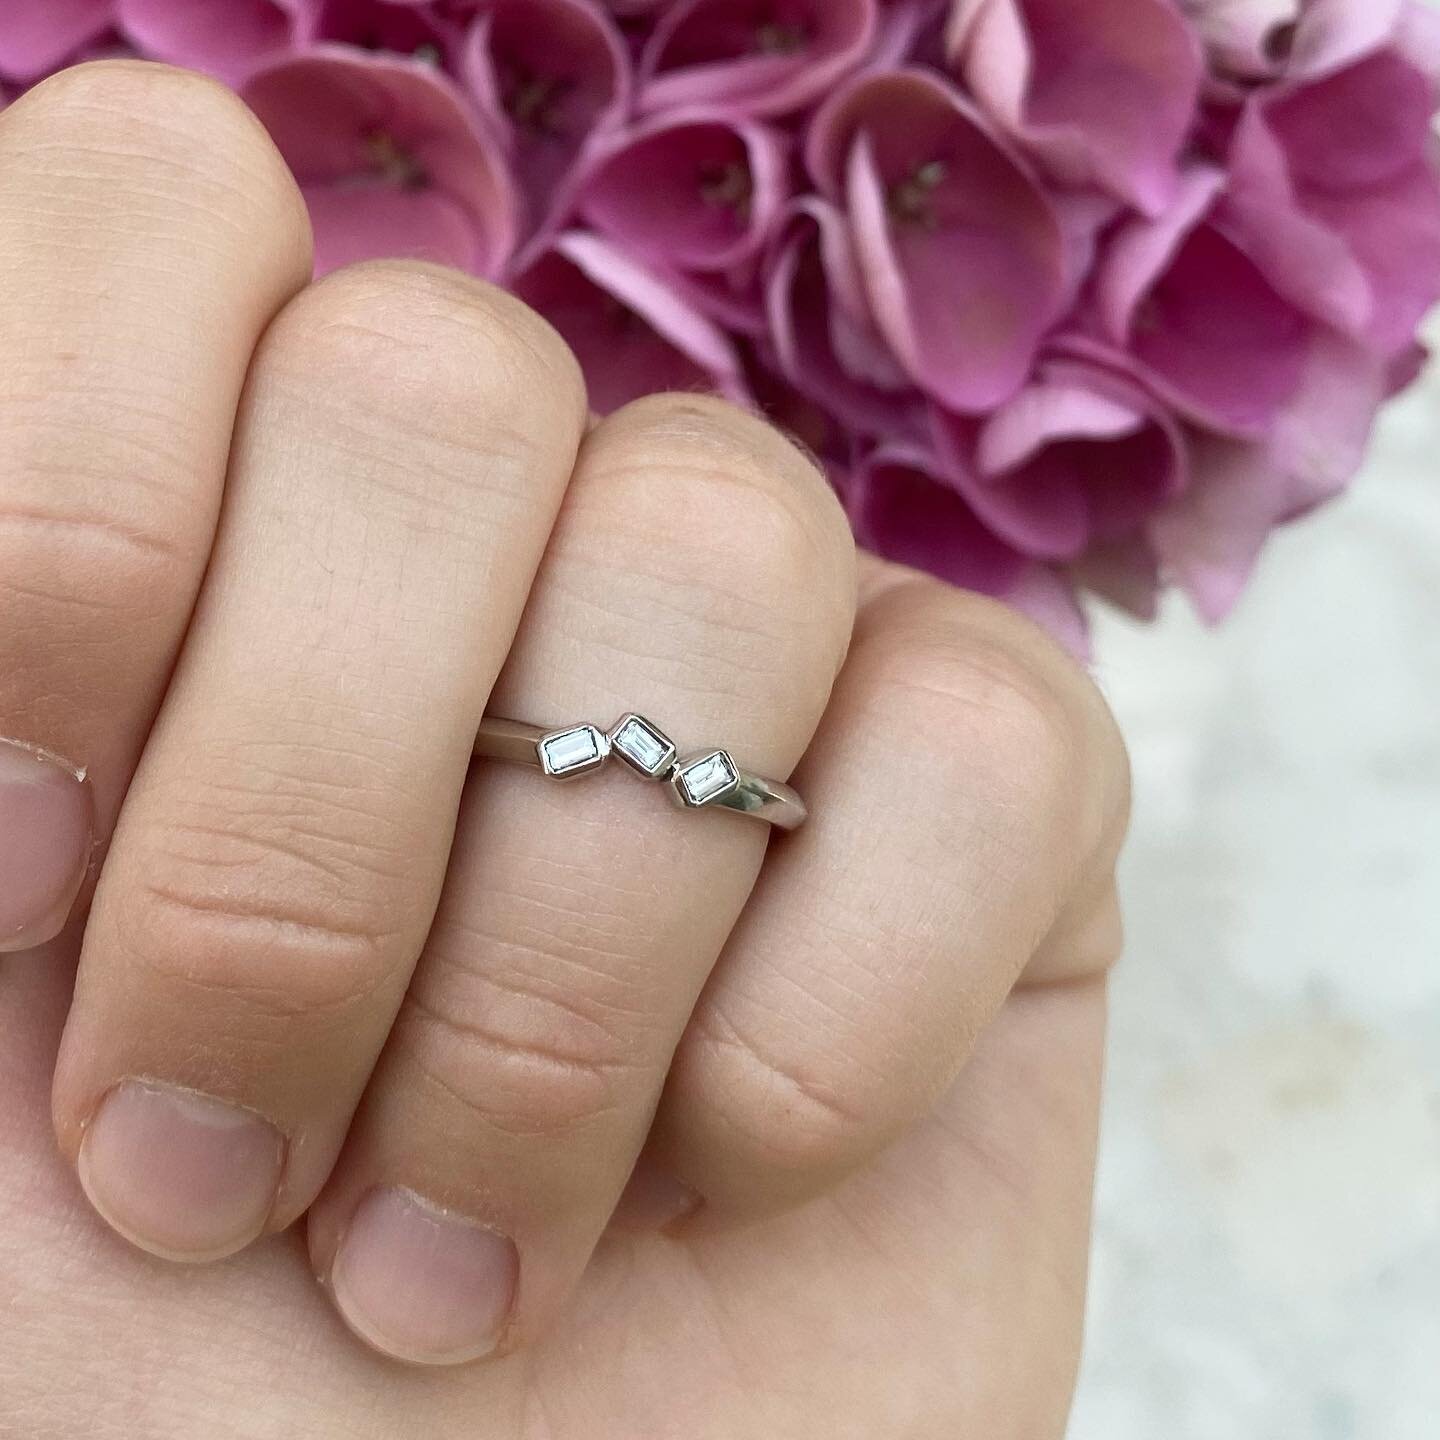 A bespoke wedding ring 🤍 It makes me so happy that weddings can go ahead as normal again.

I worked with C to create a ring that would compliment her asymmetric emerald cut diamond engagement ring, but also look lovley worn on its own too ✨✨✨